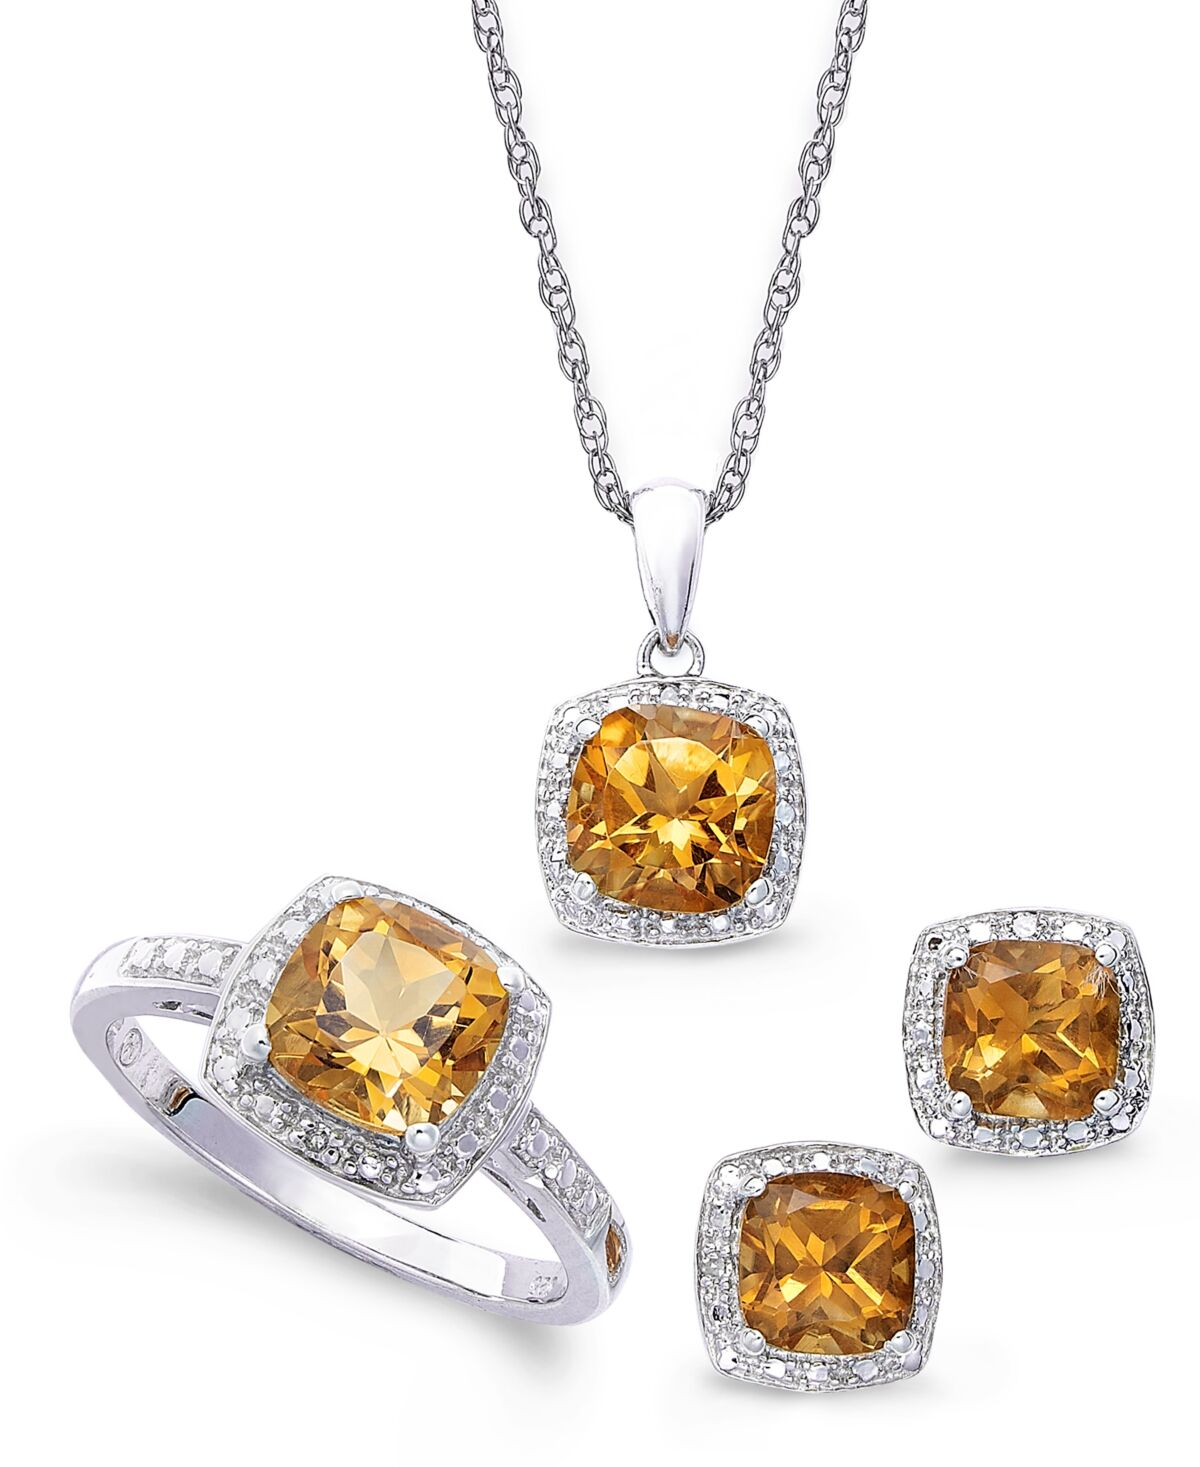 Macy's Sterling Silver Jewelry Set, Citrine (4-3/4 ct. t.w.) and Diamond Accent Necklace, Earrings and Ring Set - Citrine